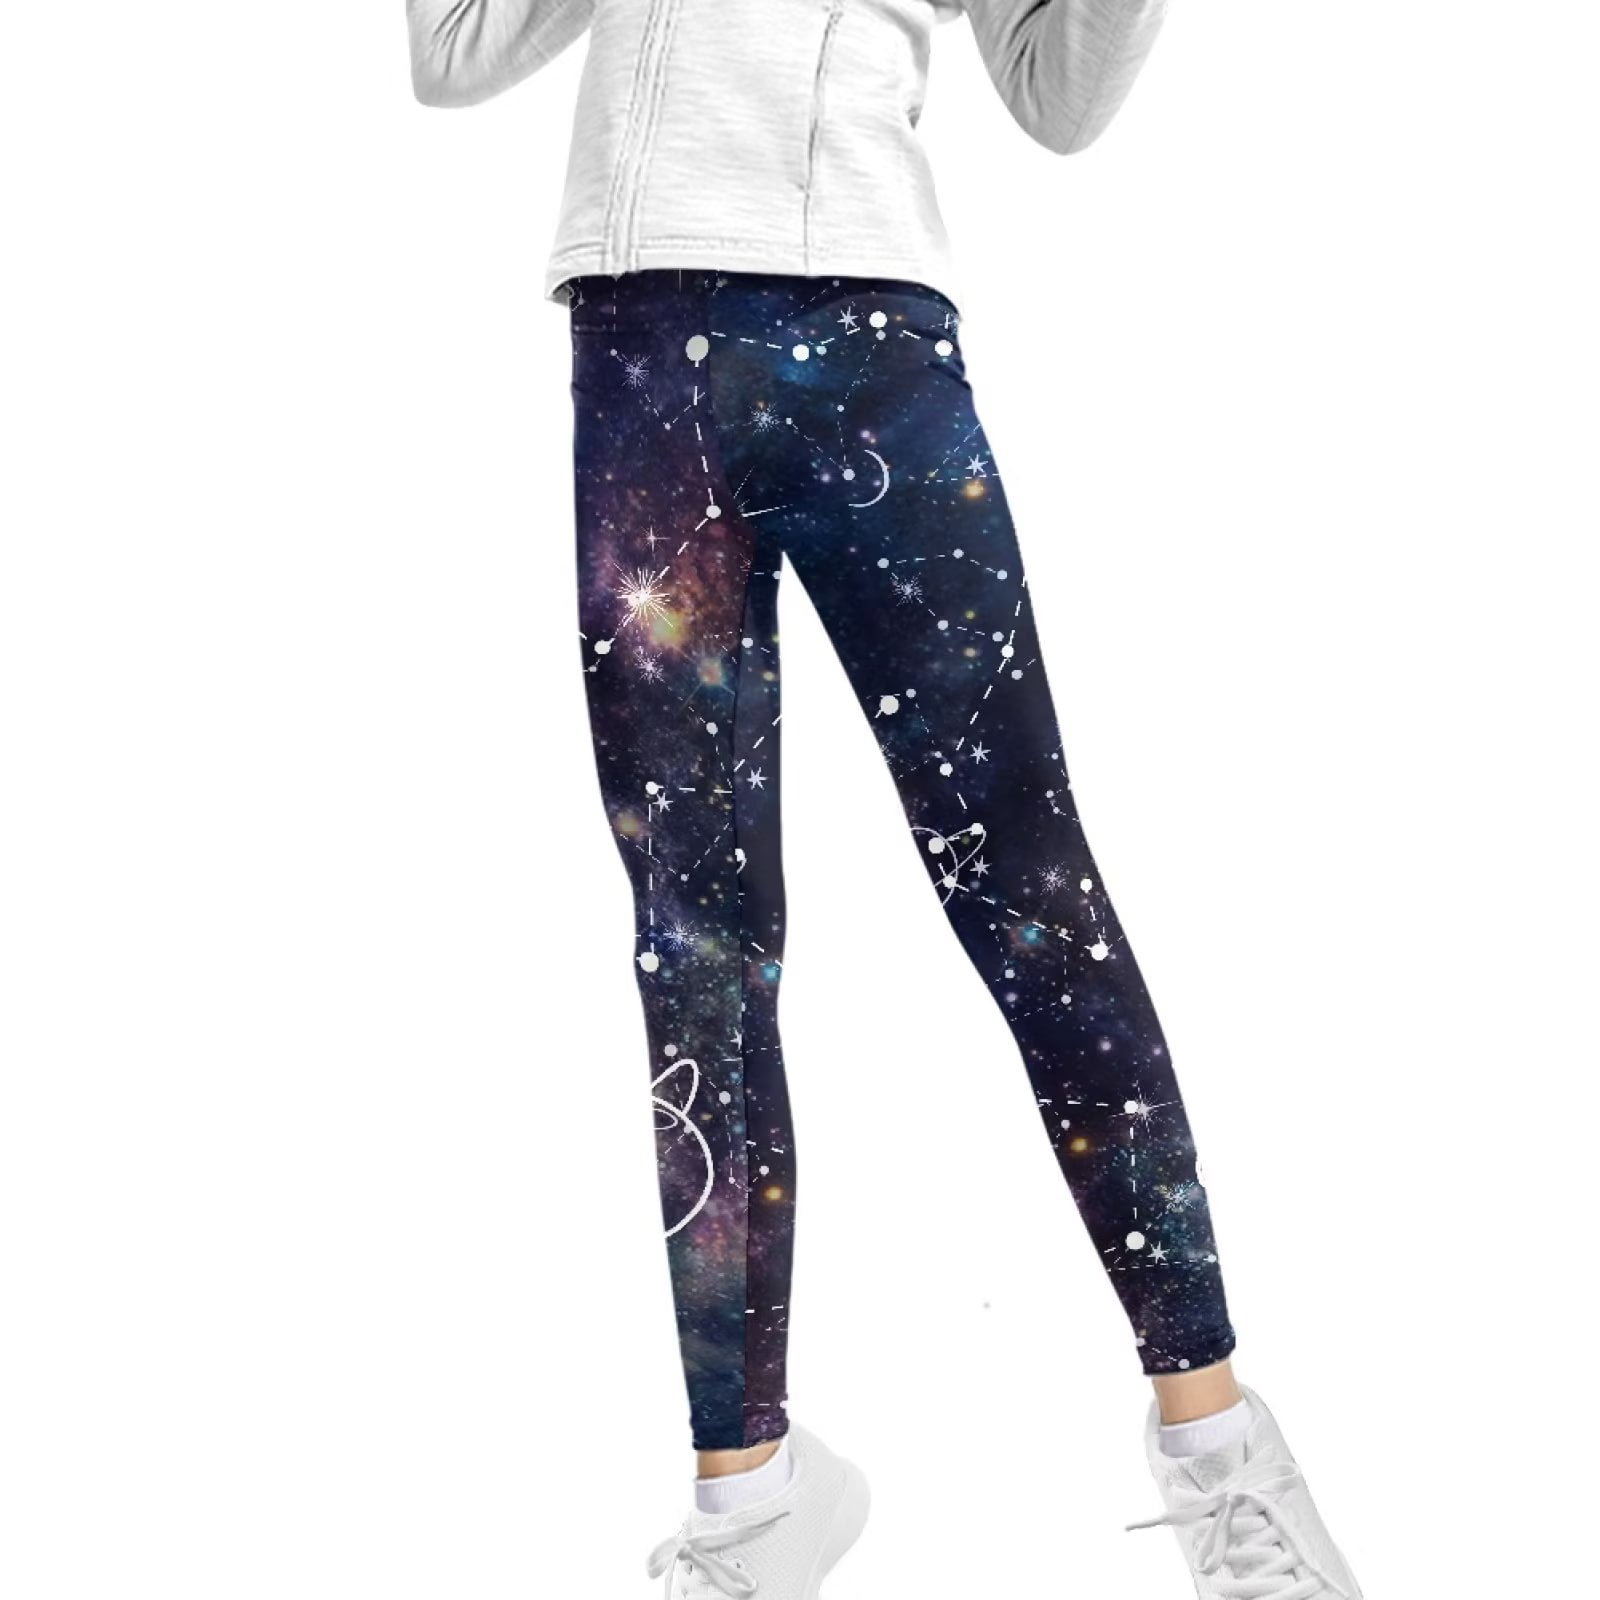 FKELYI Galaxy Space Girls Leggings Size 6-7 Years Comfortable Home Yoga  Pants High Waisted Straight Leg Soft School Teen Kids Tights 